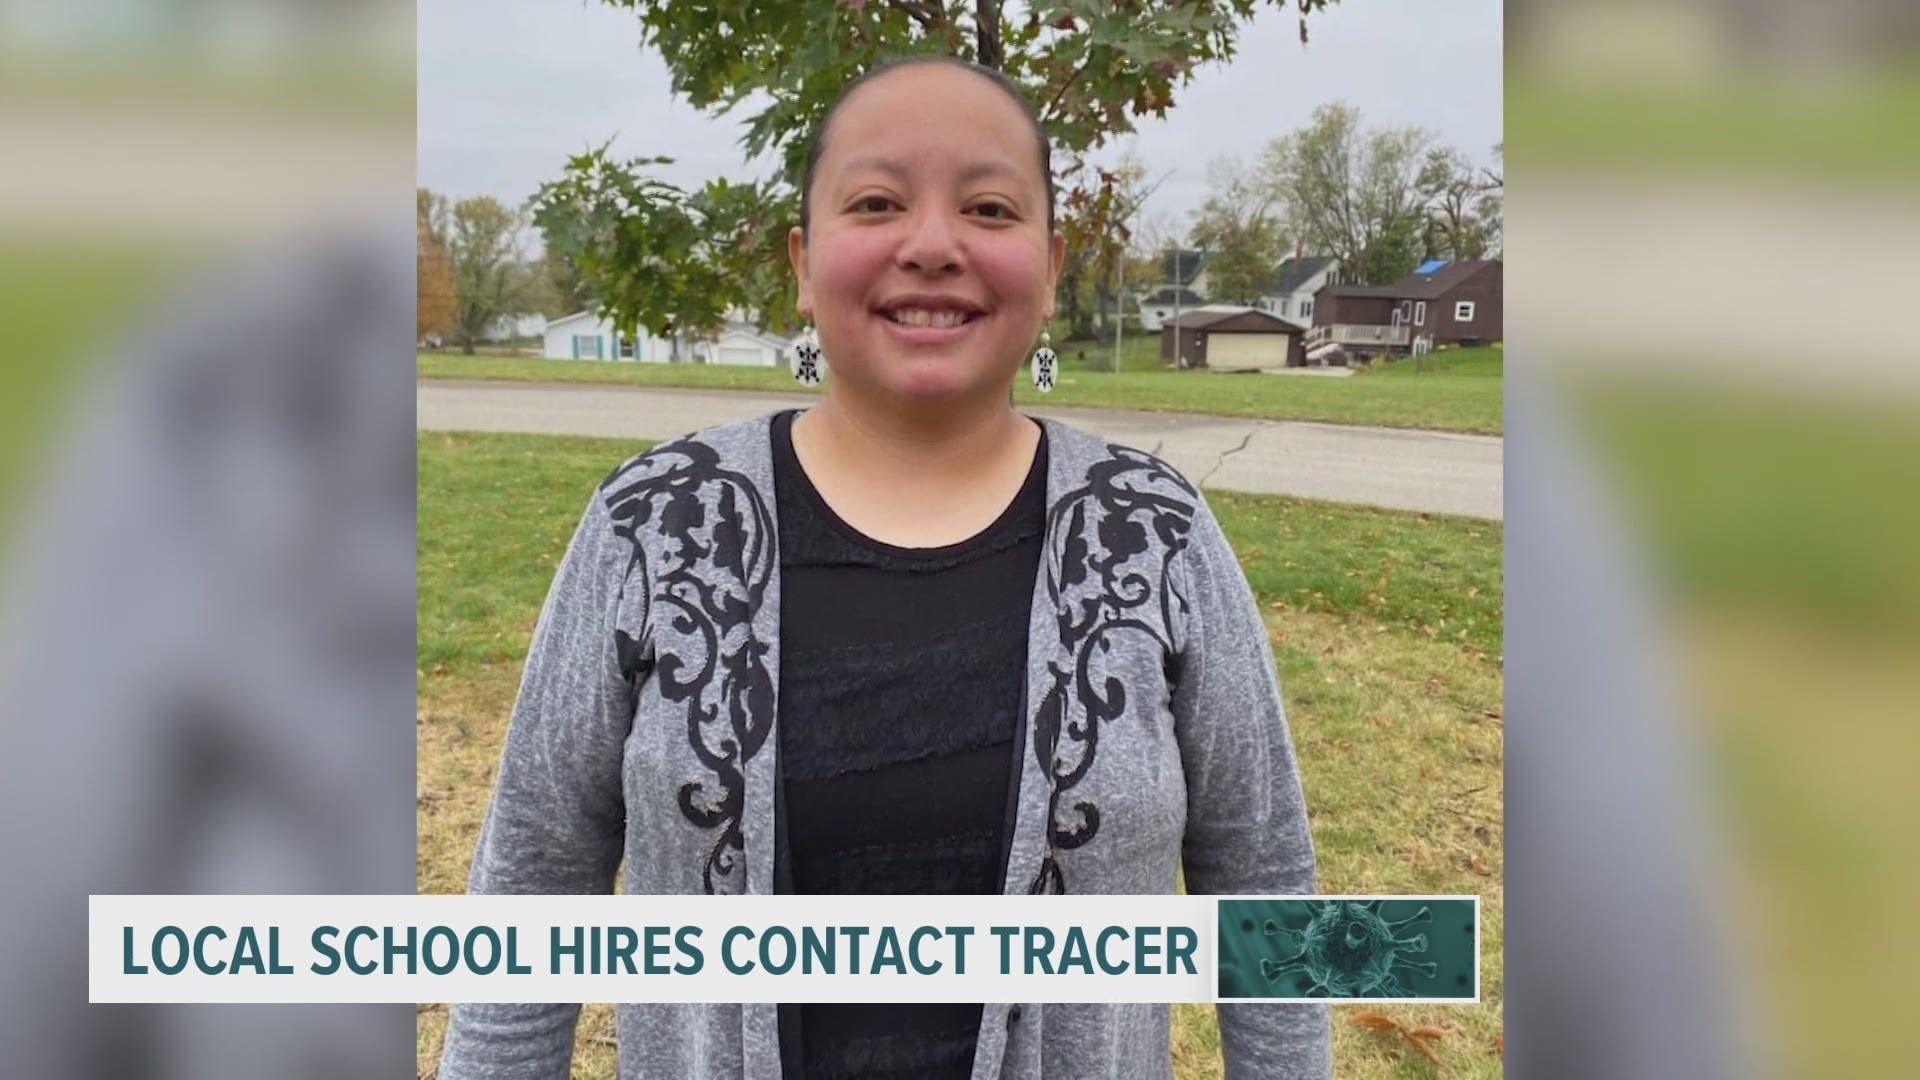 South Tama school hires contact tracer